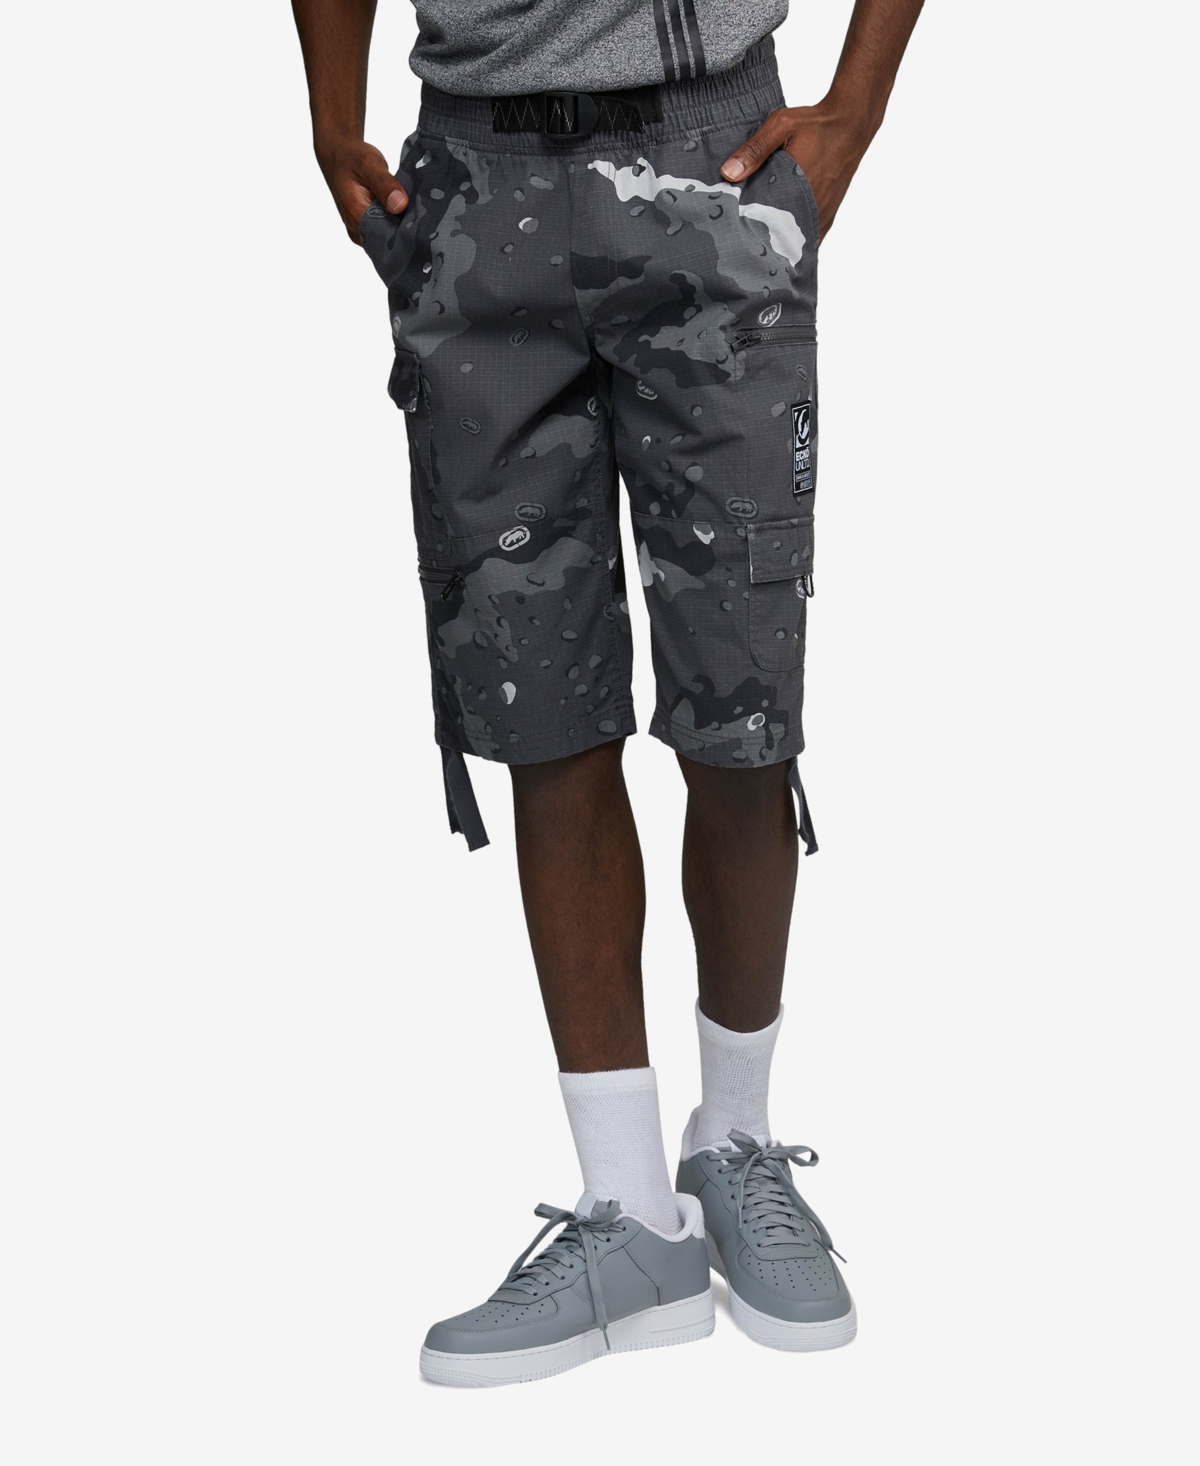 Men's Big and Tall Puller Cargo Shorts with Adjustable Belt, 2 Piece Set - Gray